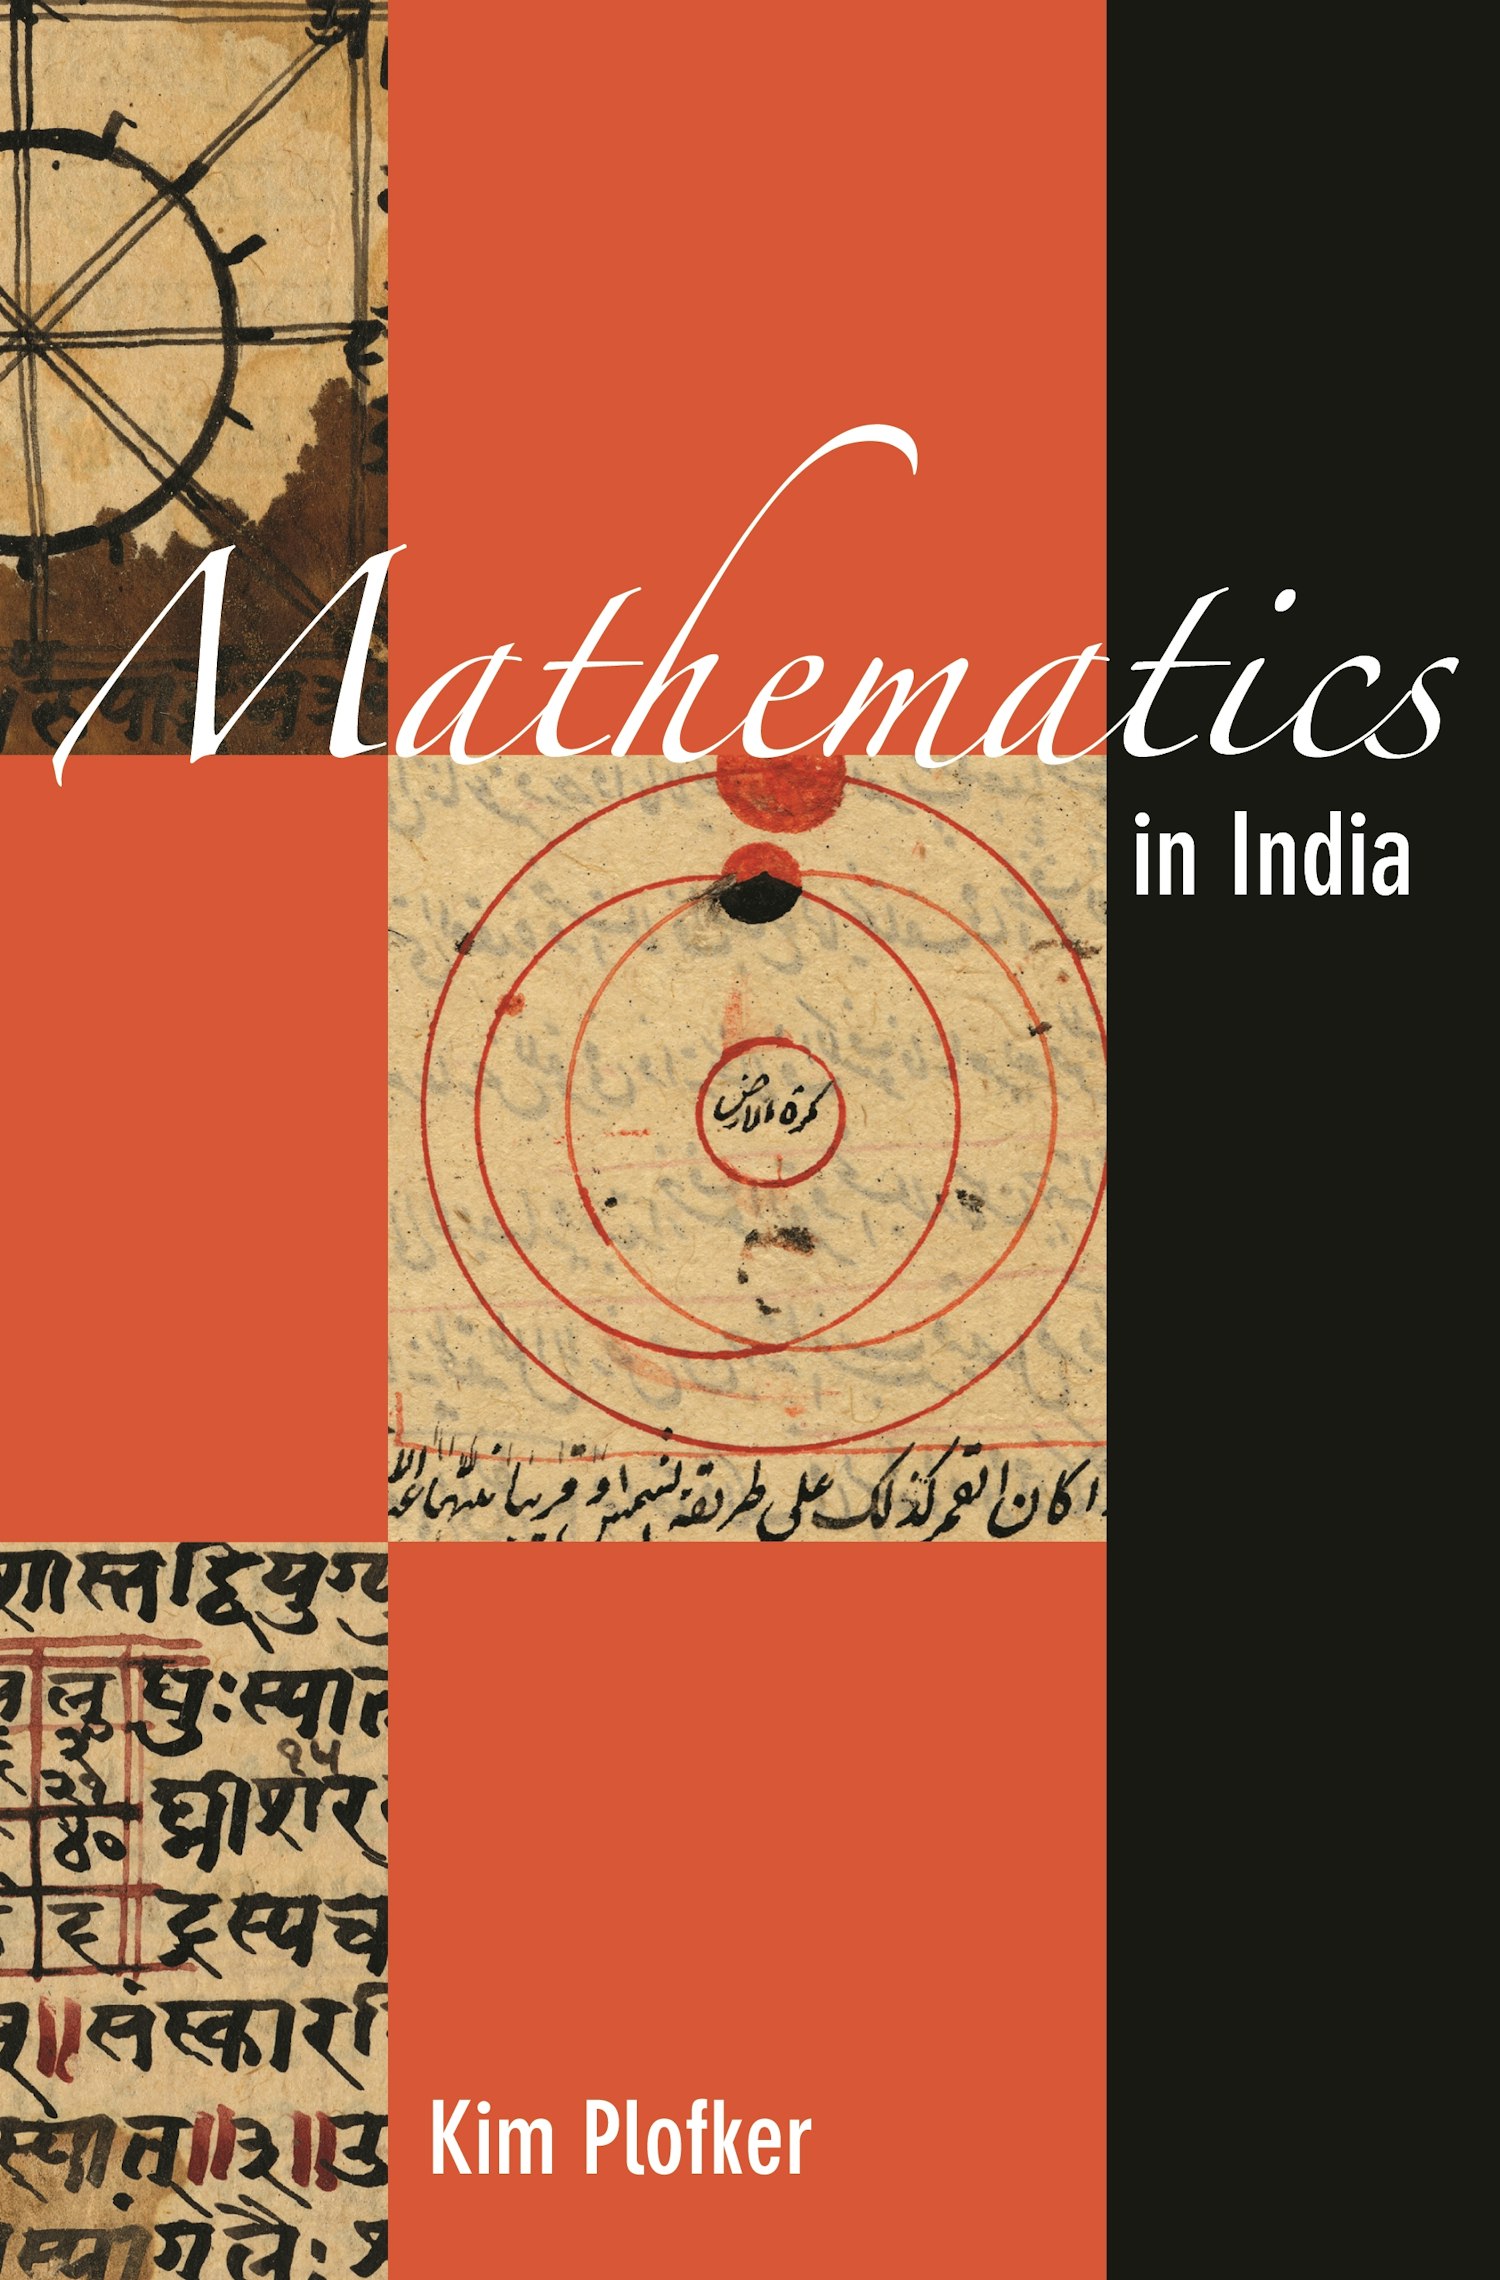 phd in mathematics education in india